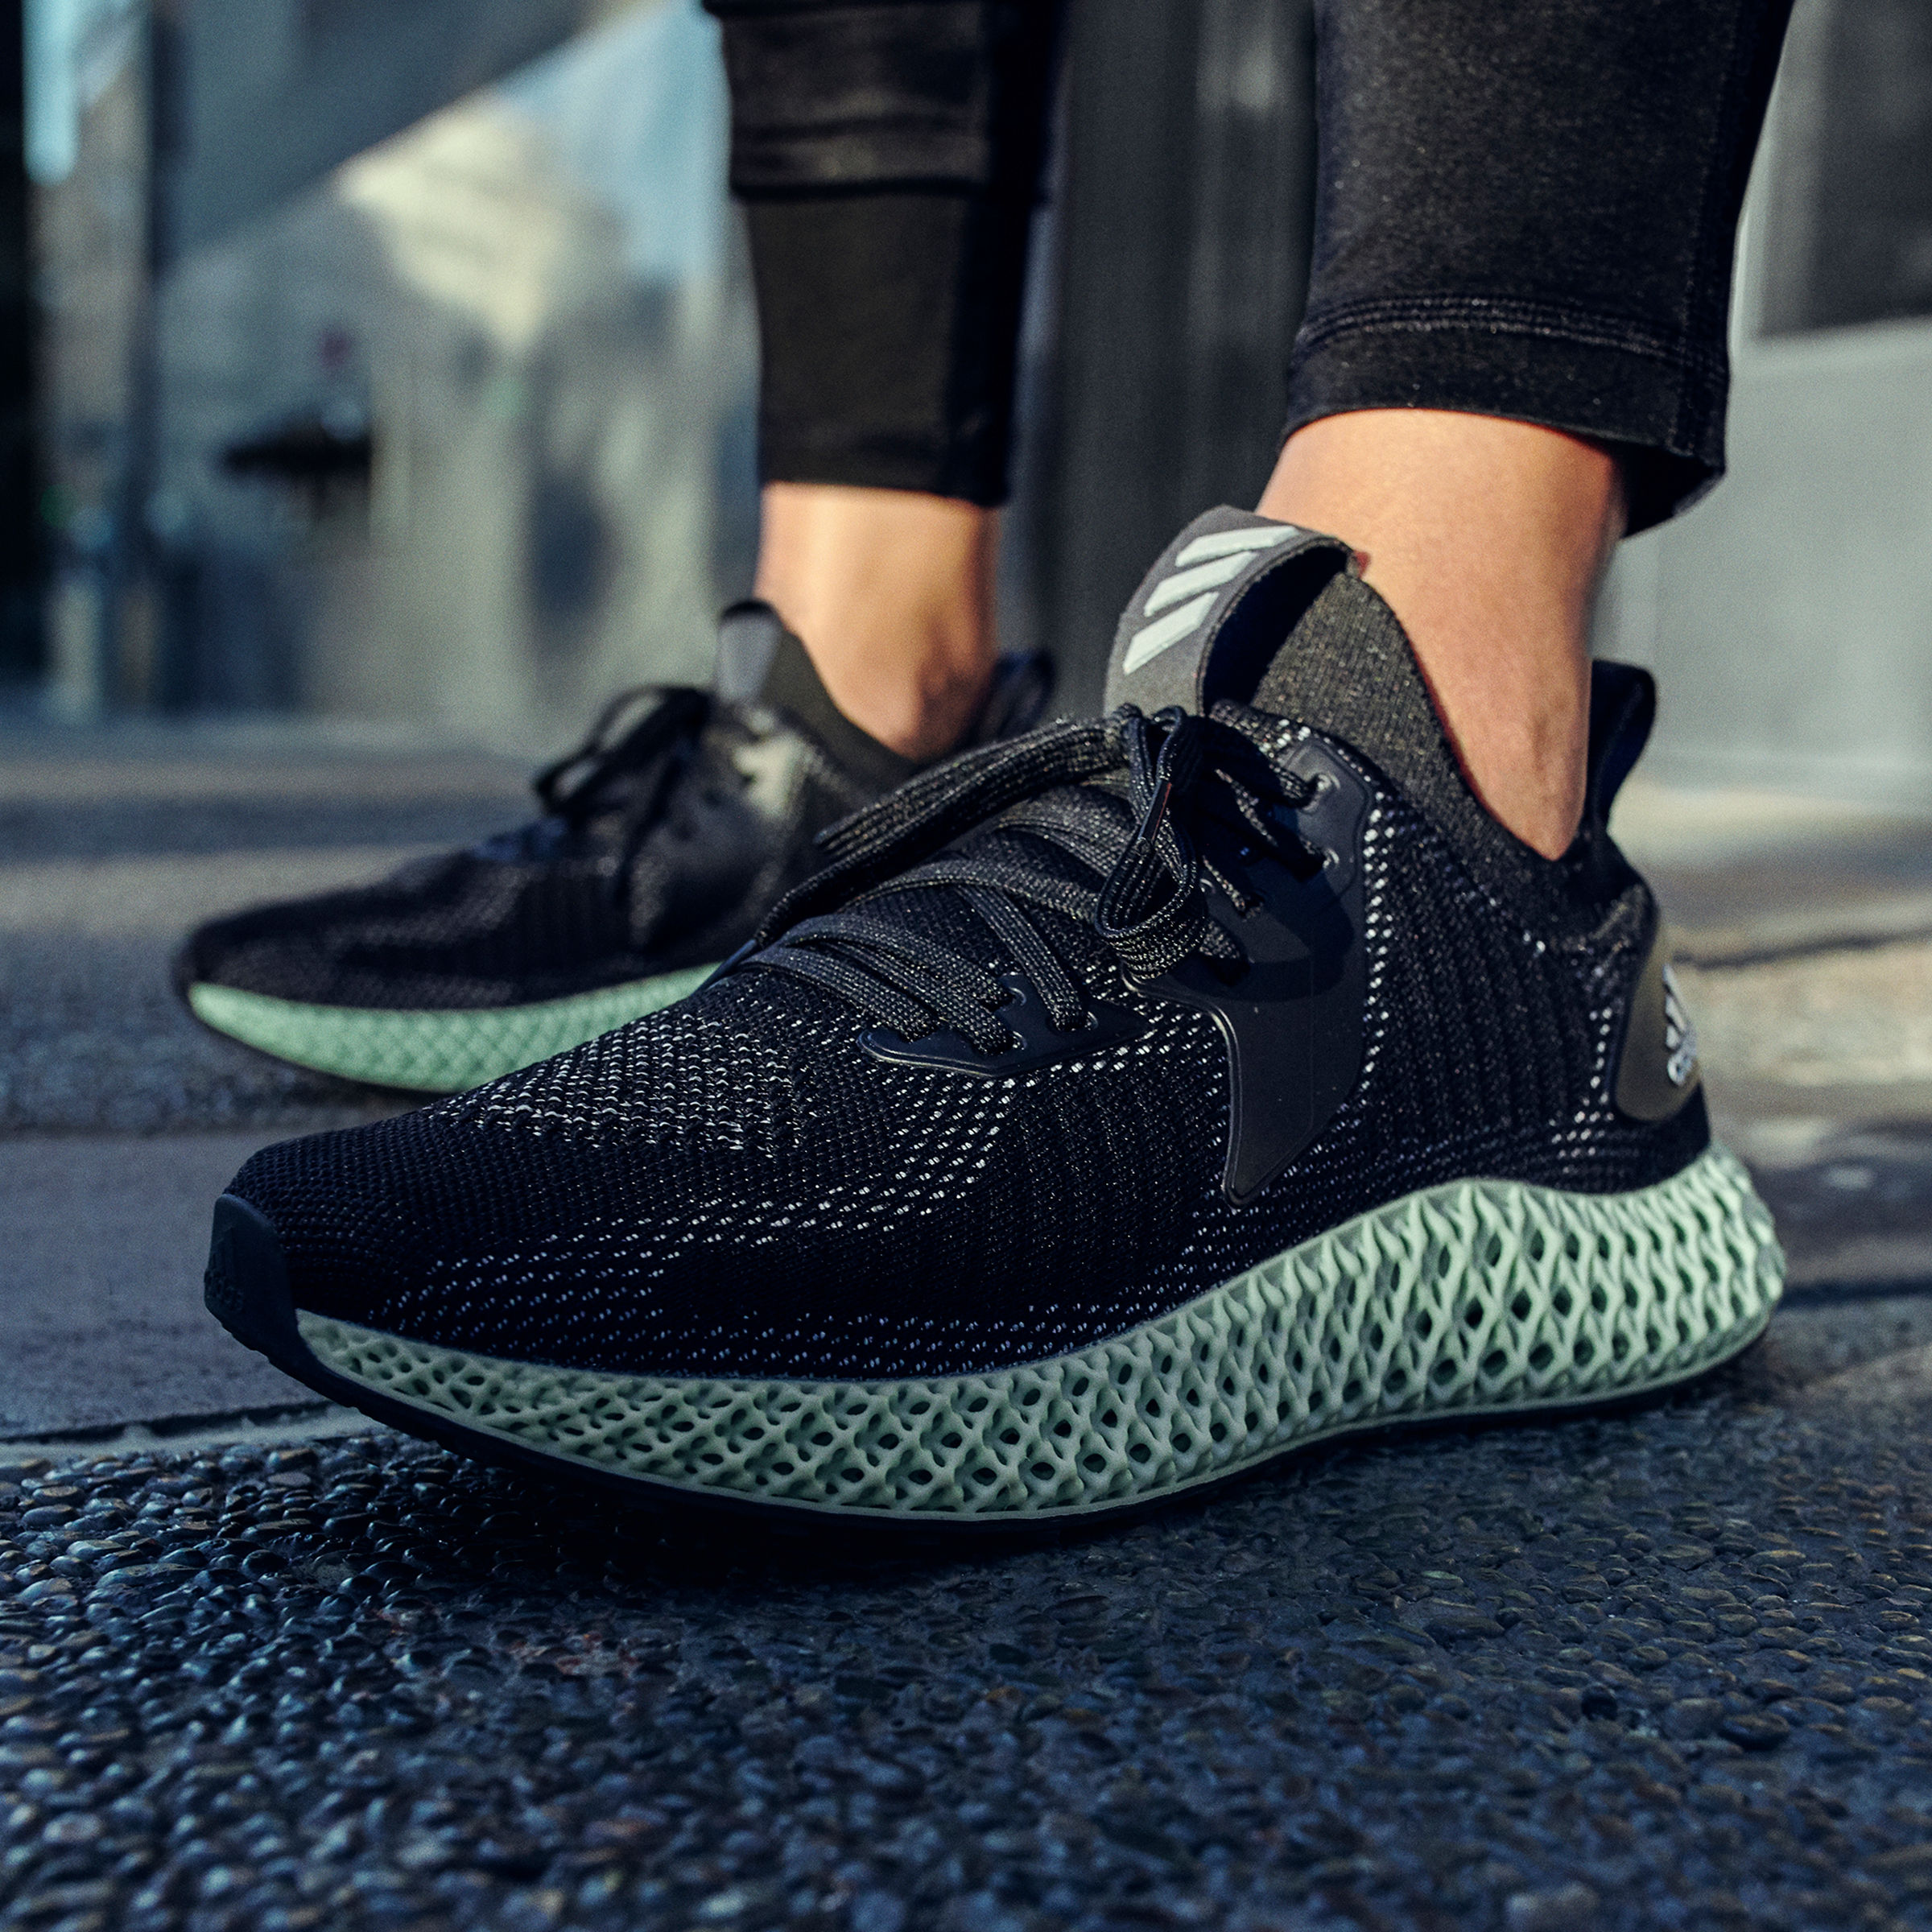 binær Resignation Husk The adidas AlphaEdge 4D debuts in India with new reflective tech